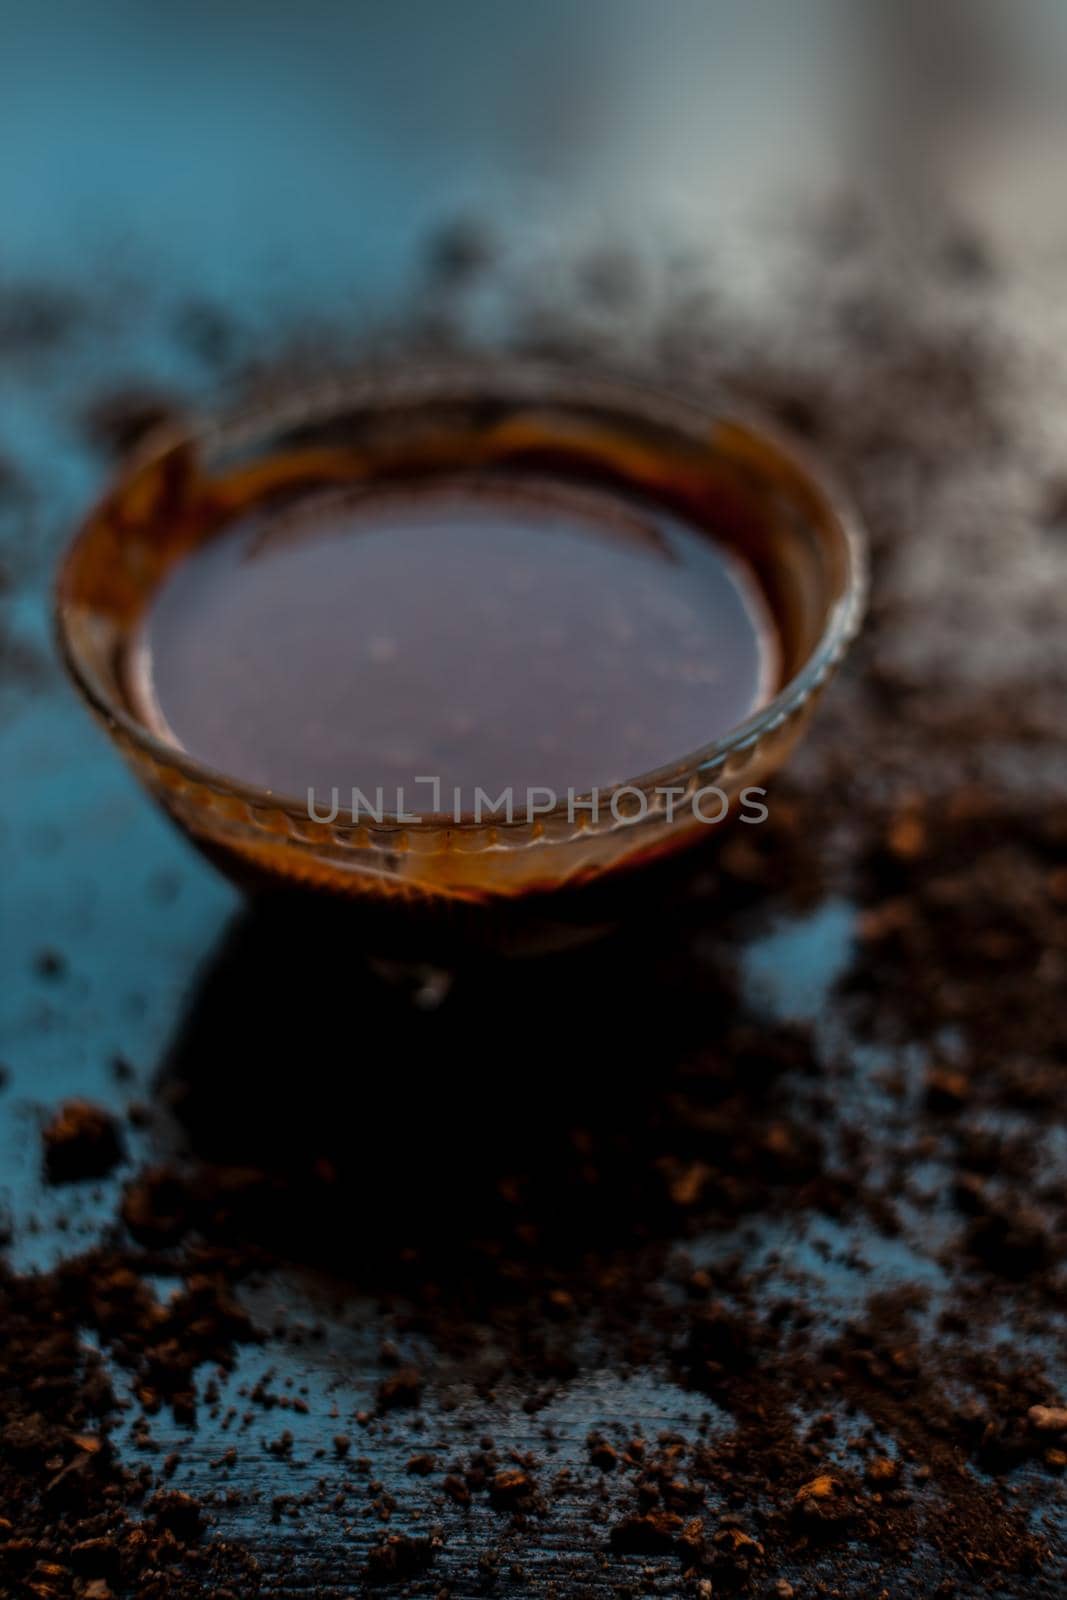 A bowl full of chocolate milk on a black wooden surface with some raw cocoa powder sprinkled around it.